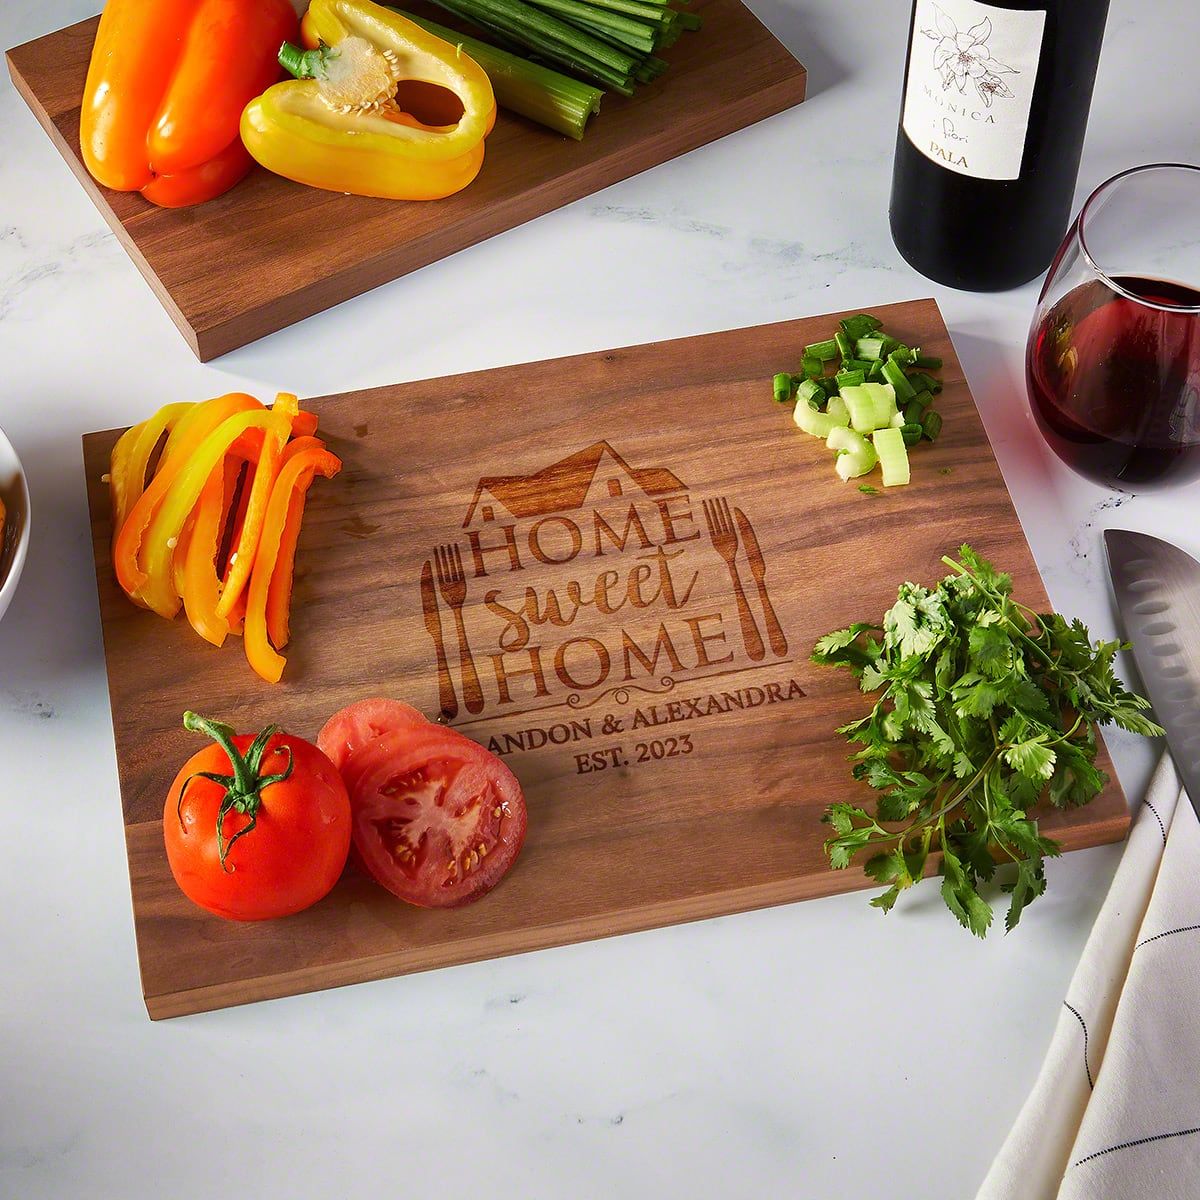 https://images.homewetbar.com/media/catalog/product/p/e/personalized-walnut-charcuterie-cutting-board-standard-home-sweet-home-p-9565.jpg?store=default&image-type=image